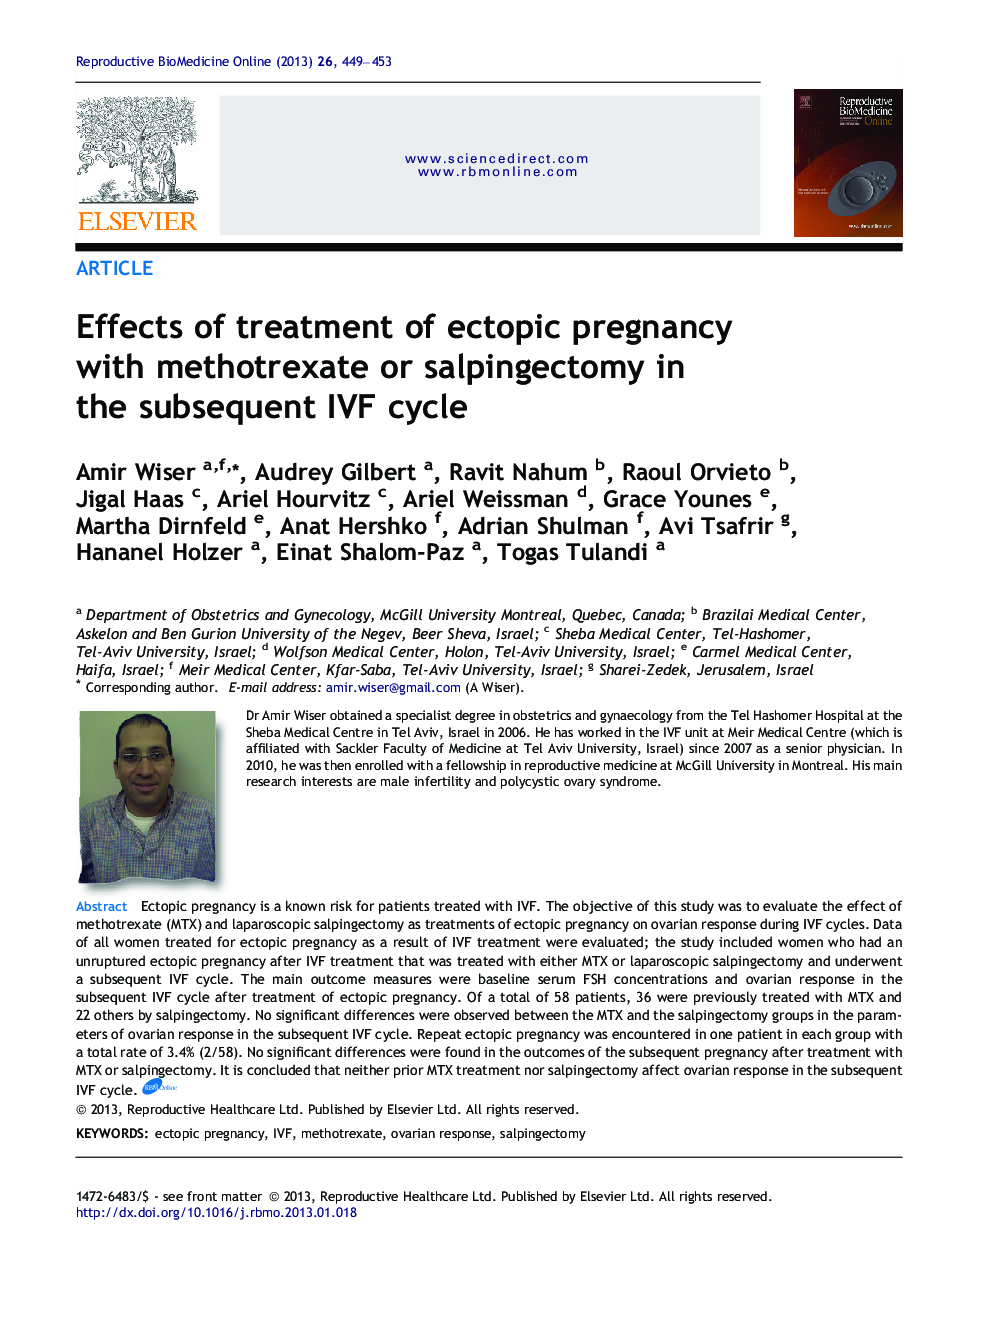 Effects of treatment of ectopic pregnancy with methotrexate or salpingectomy in the subsequent IVF cycle